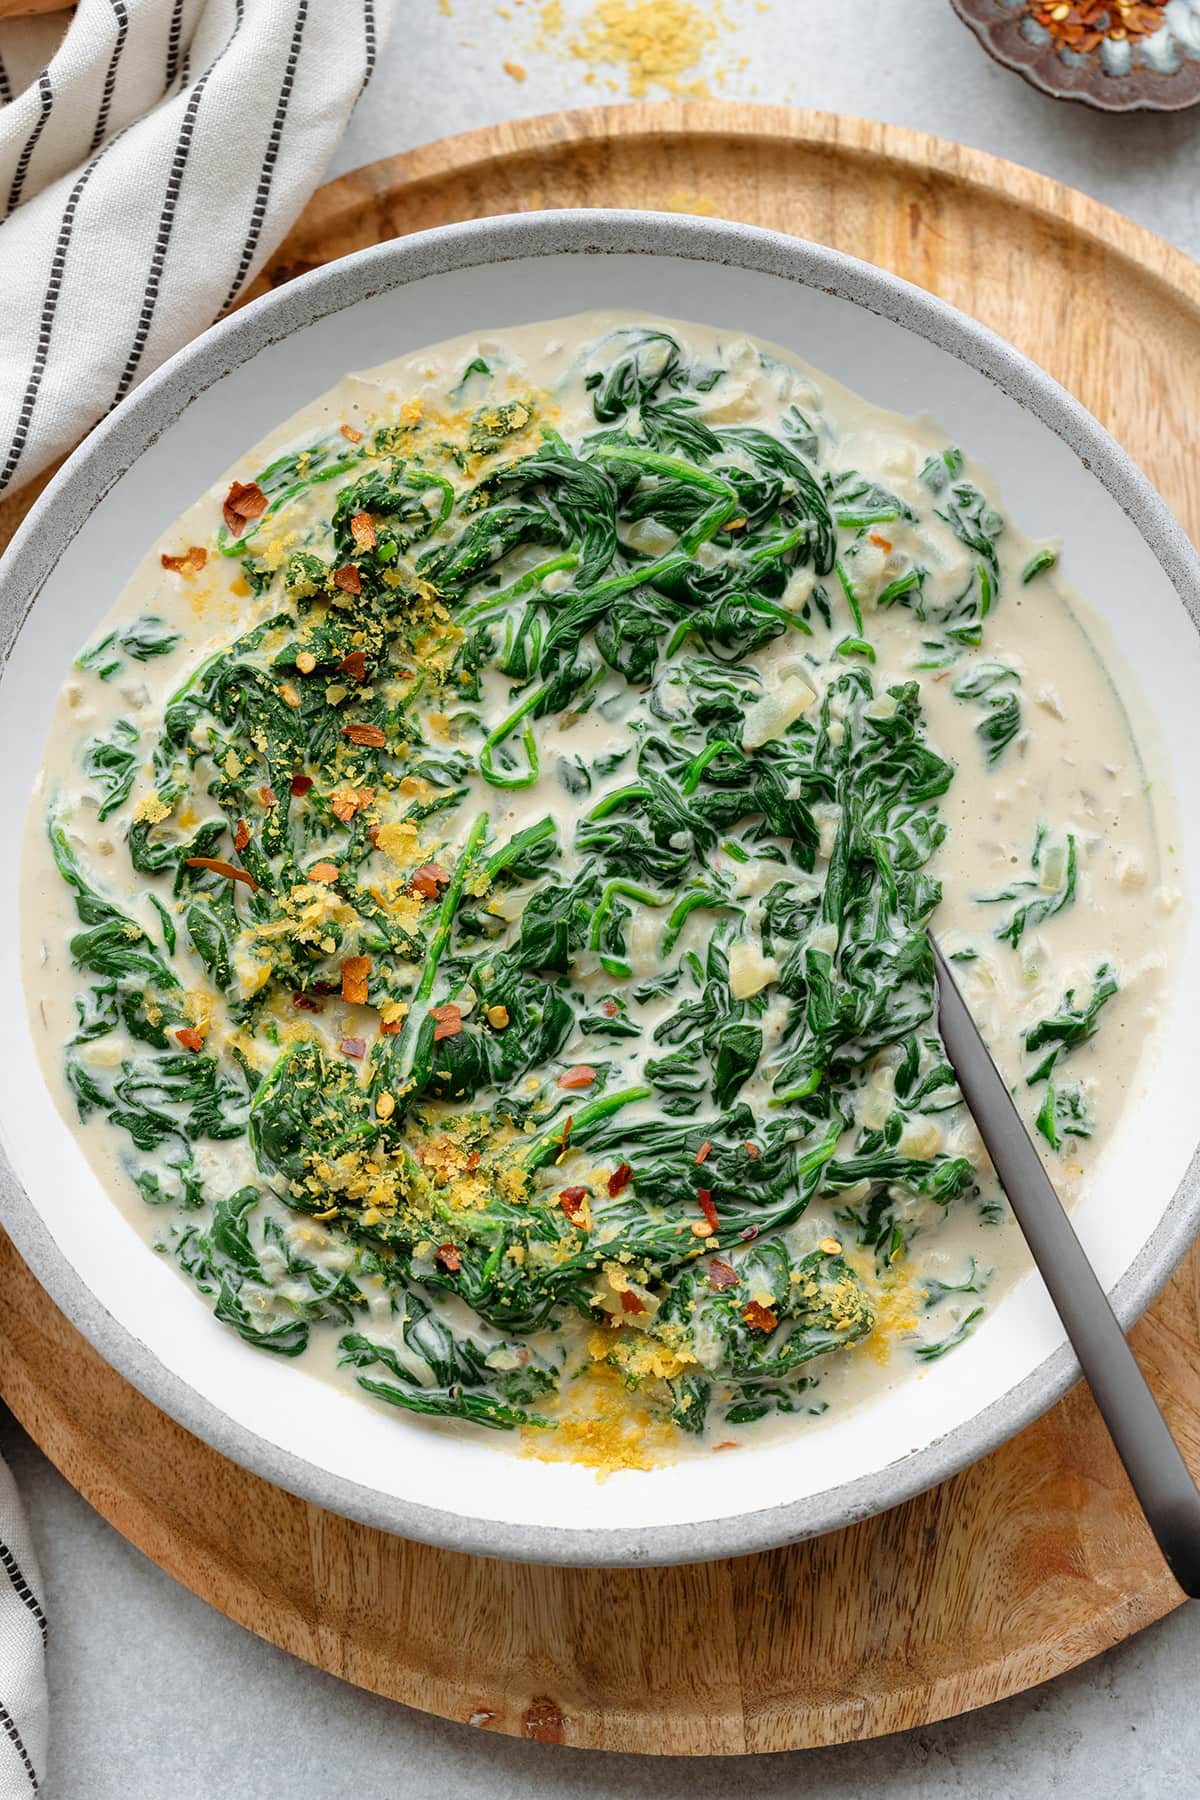 Creamy spinach served on a grey white ceramic plate sprinkled with nutritional yeast and chili flakes.